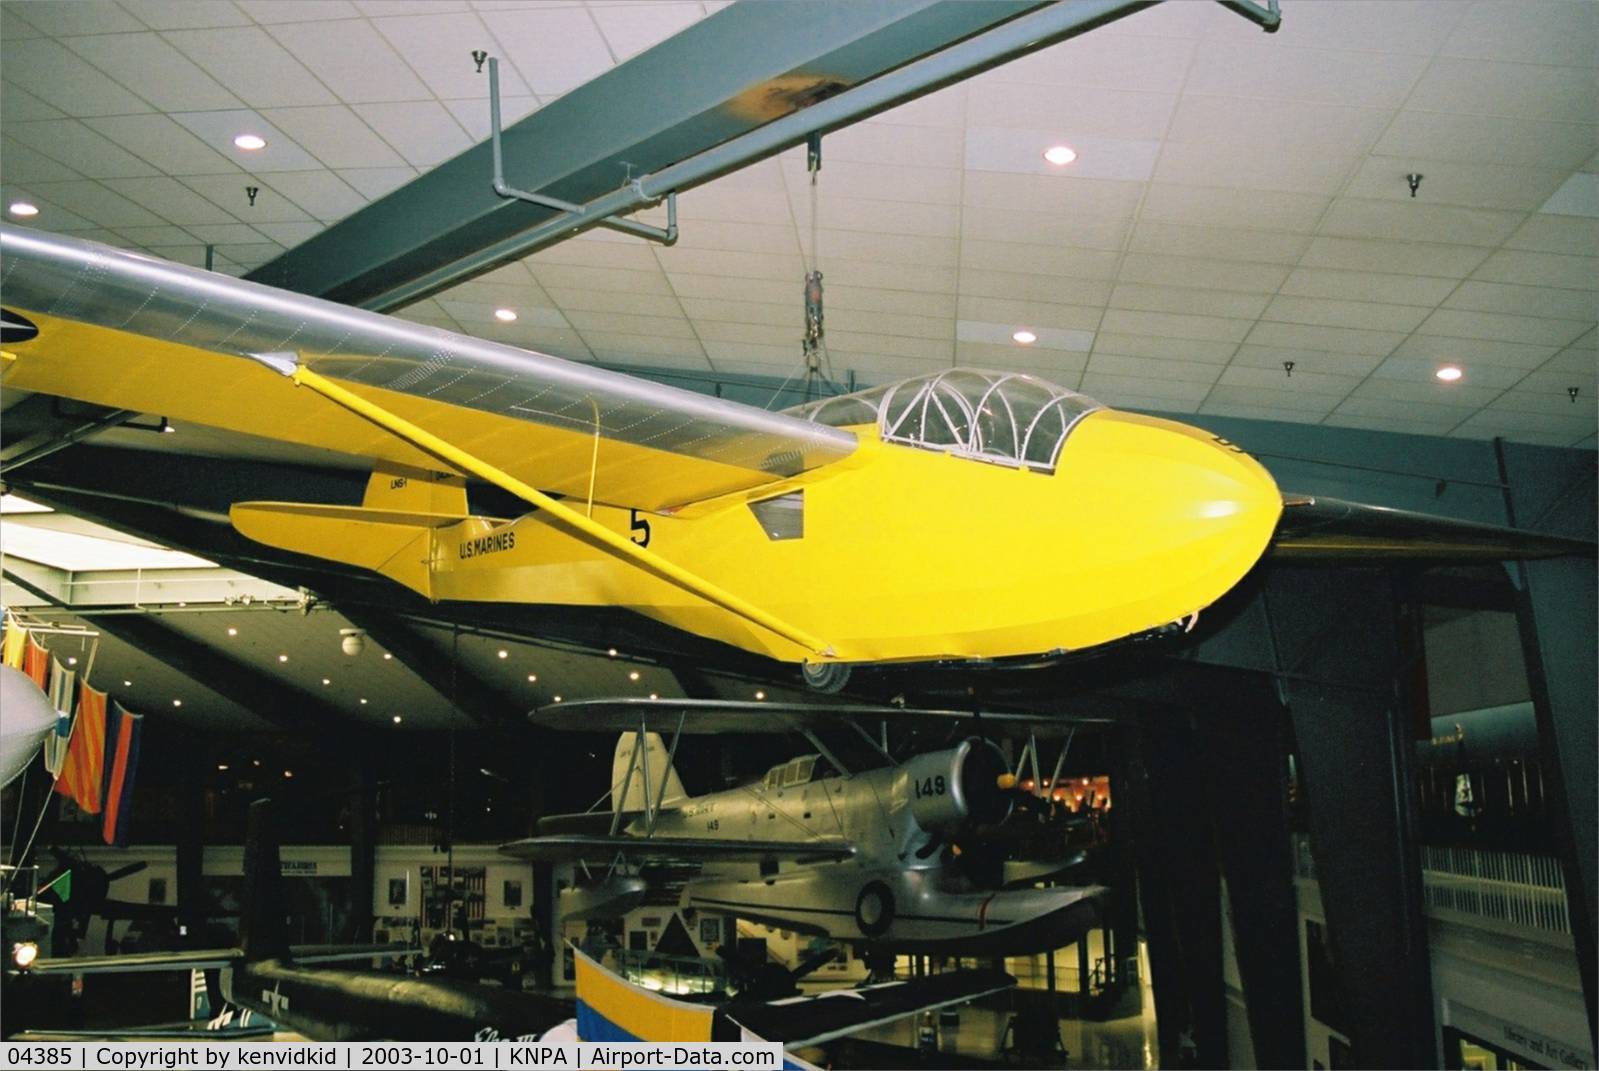 04385, Schweizer LNS-1 C/N 7, On display at the Museum of Naval Aviation, Pensacola.